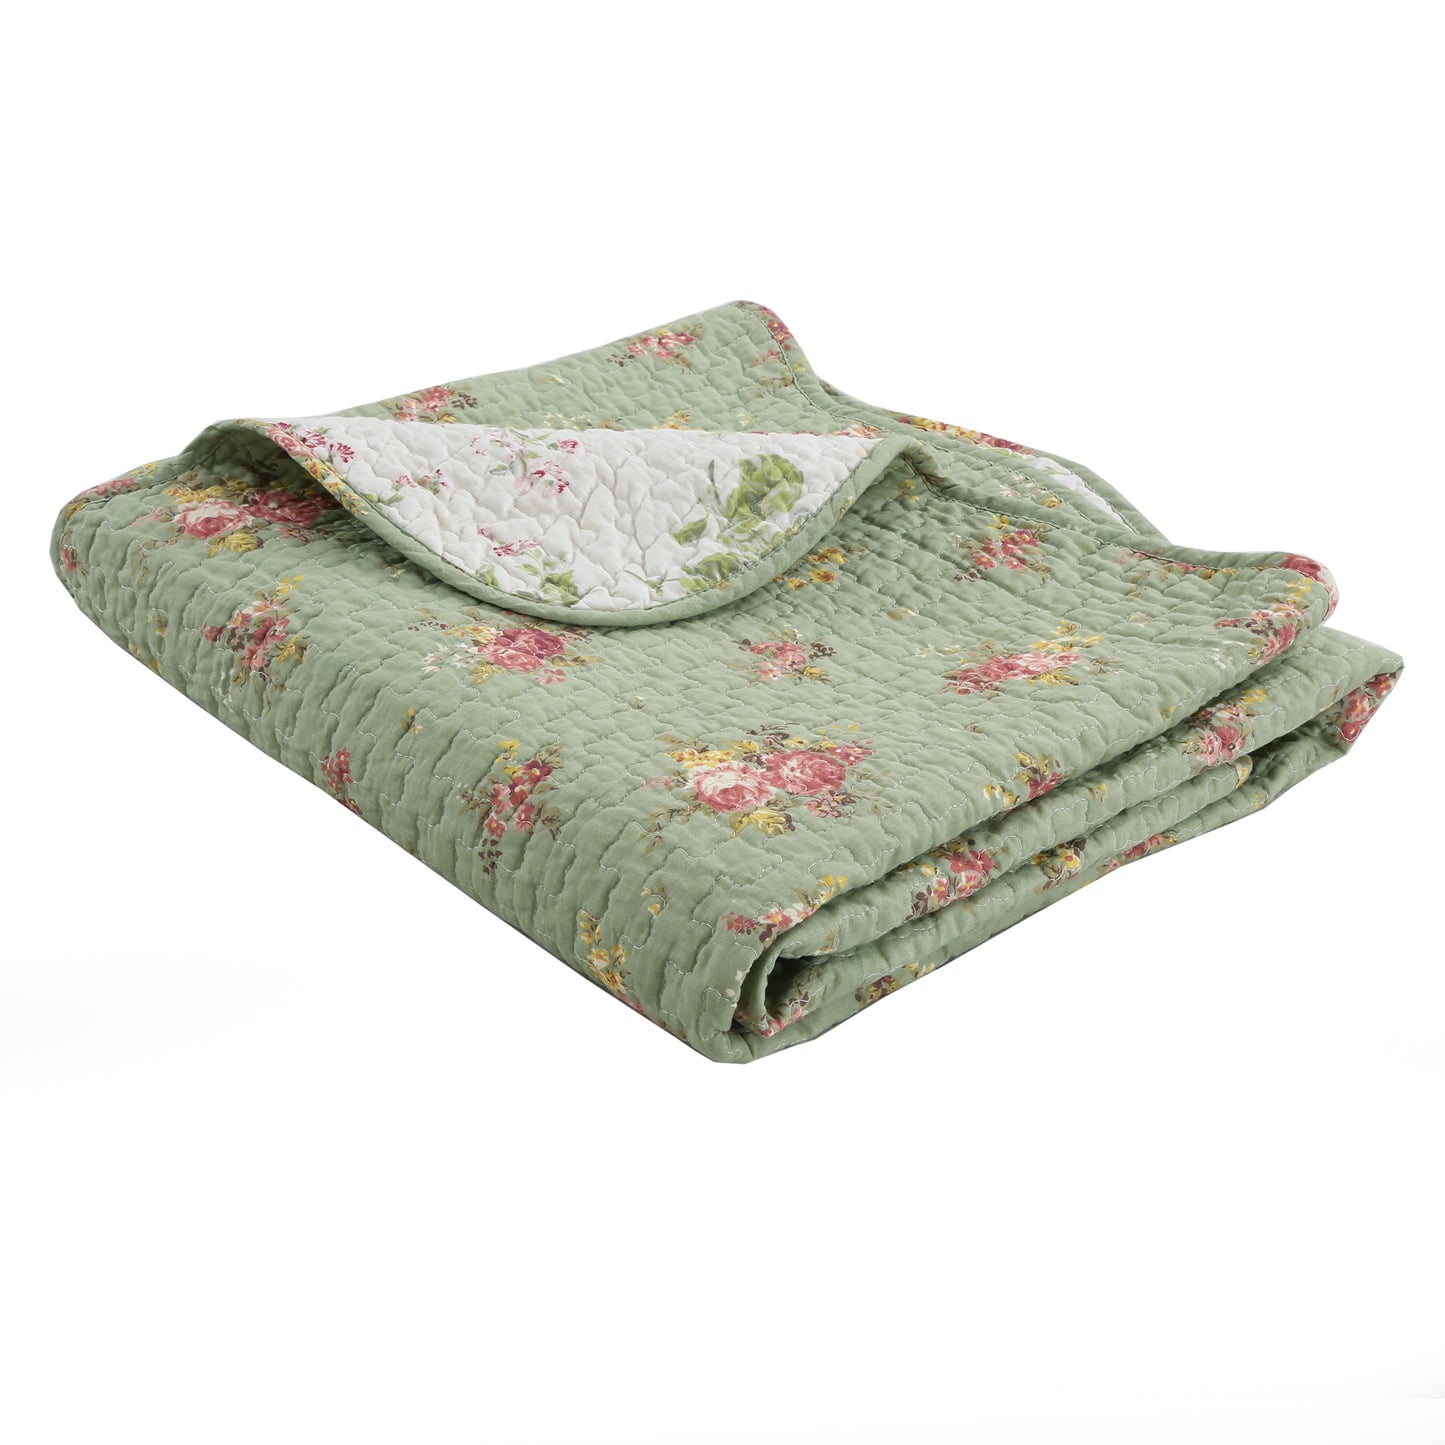 Green Floral Scalloped Edge Cotton Reversible Quilted Throw Blanket